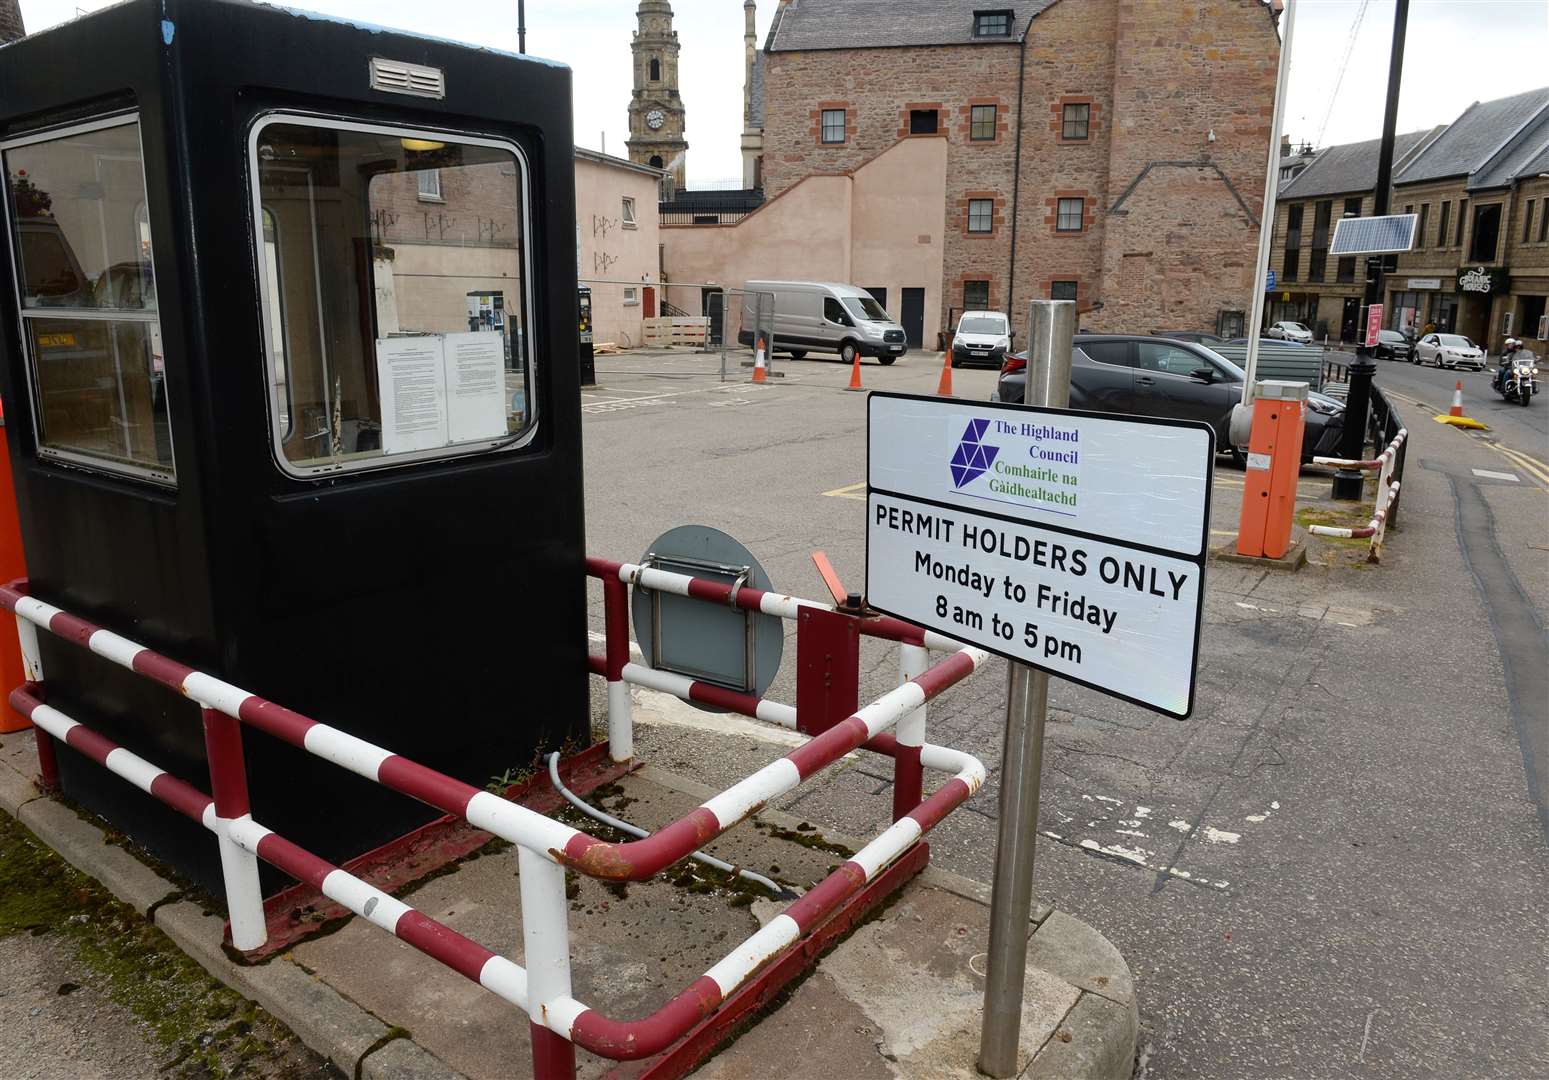 Call for Highland Council car park to be used 24/7 by public.